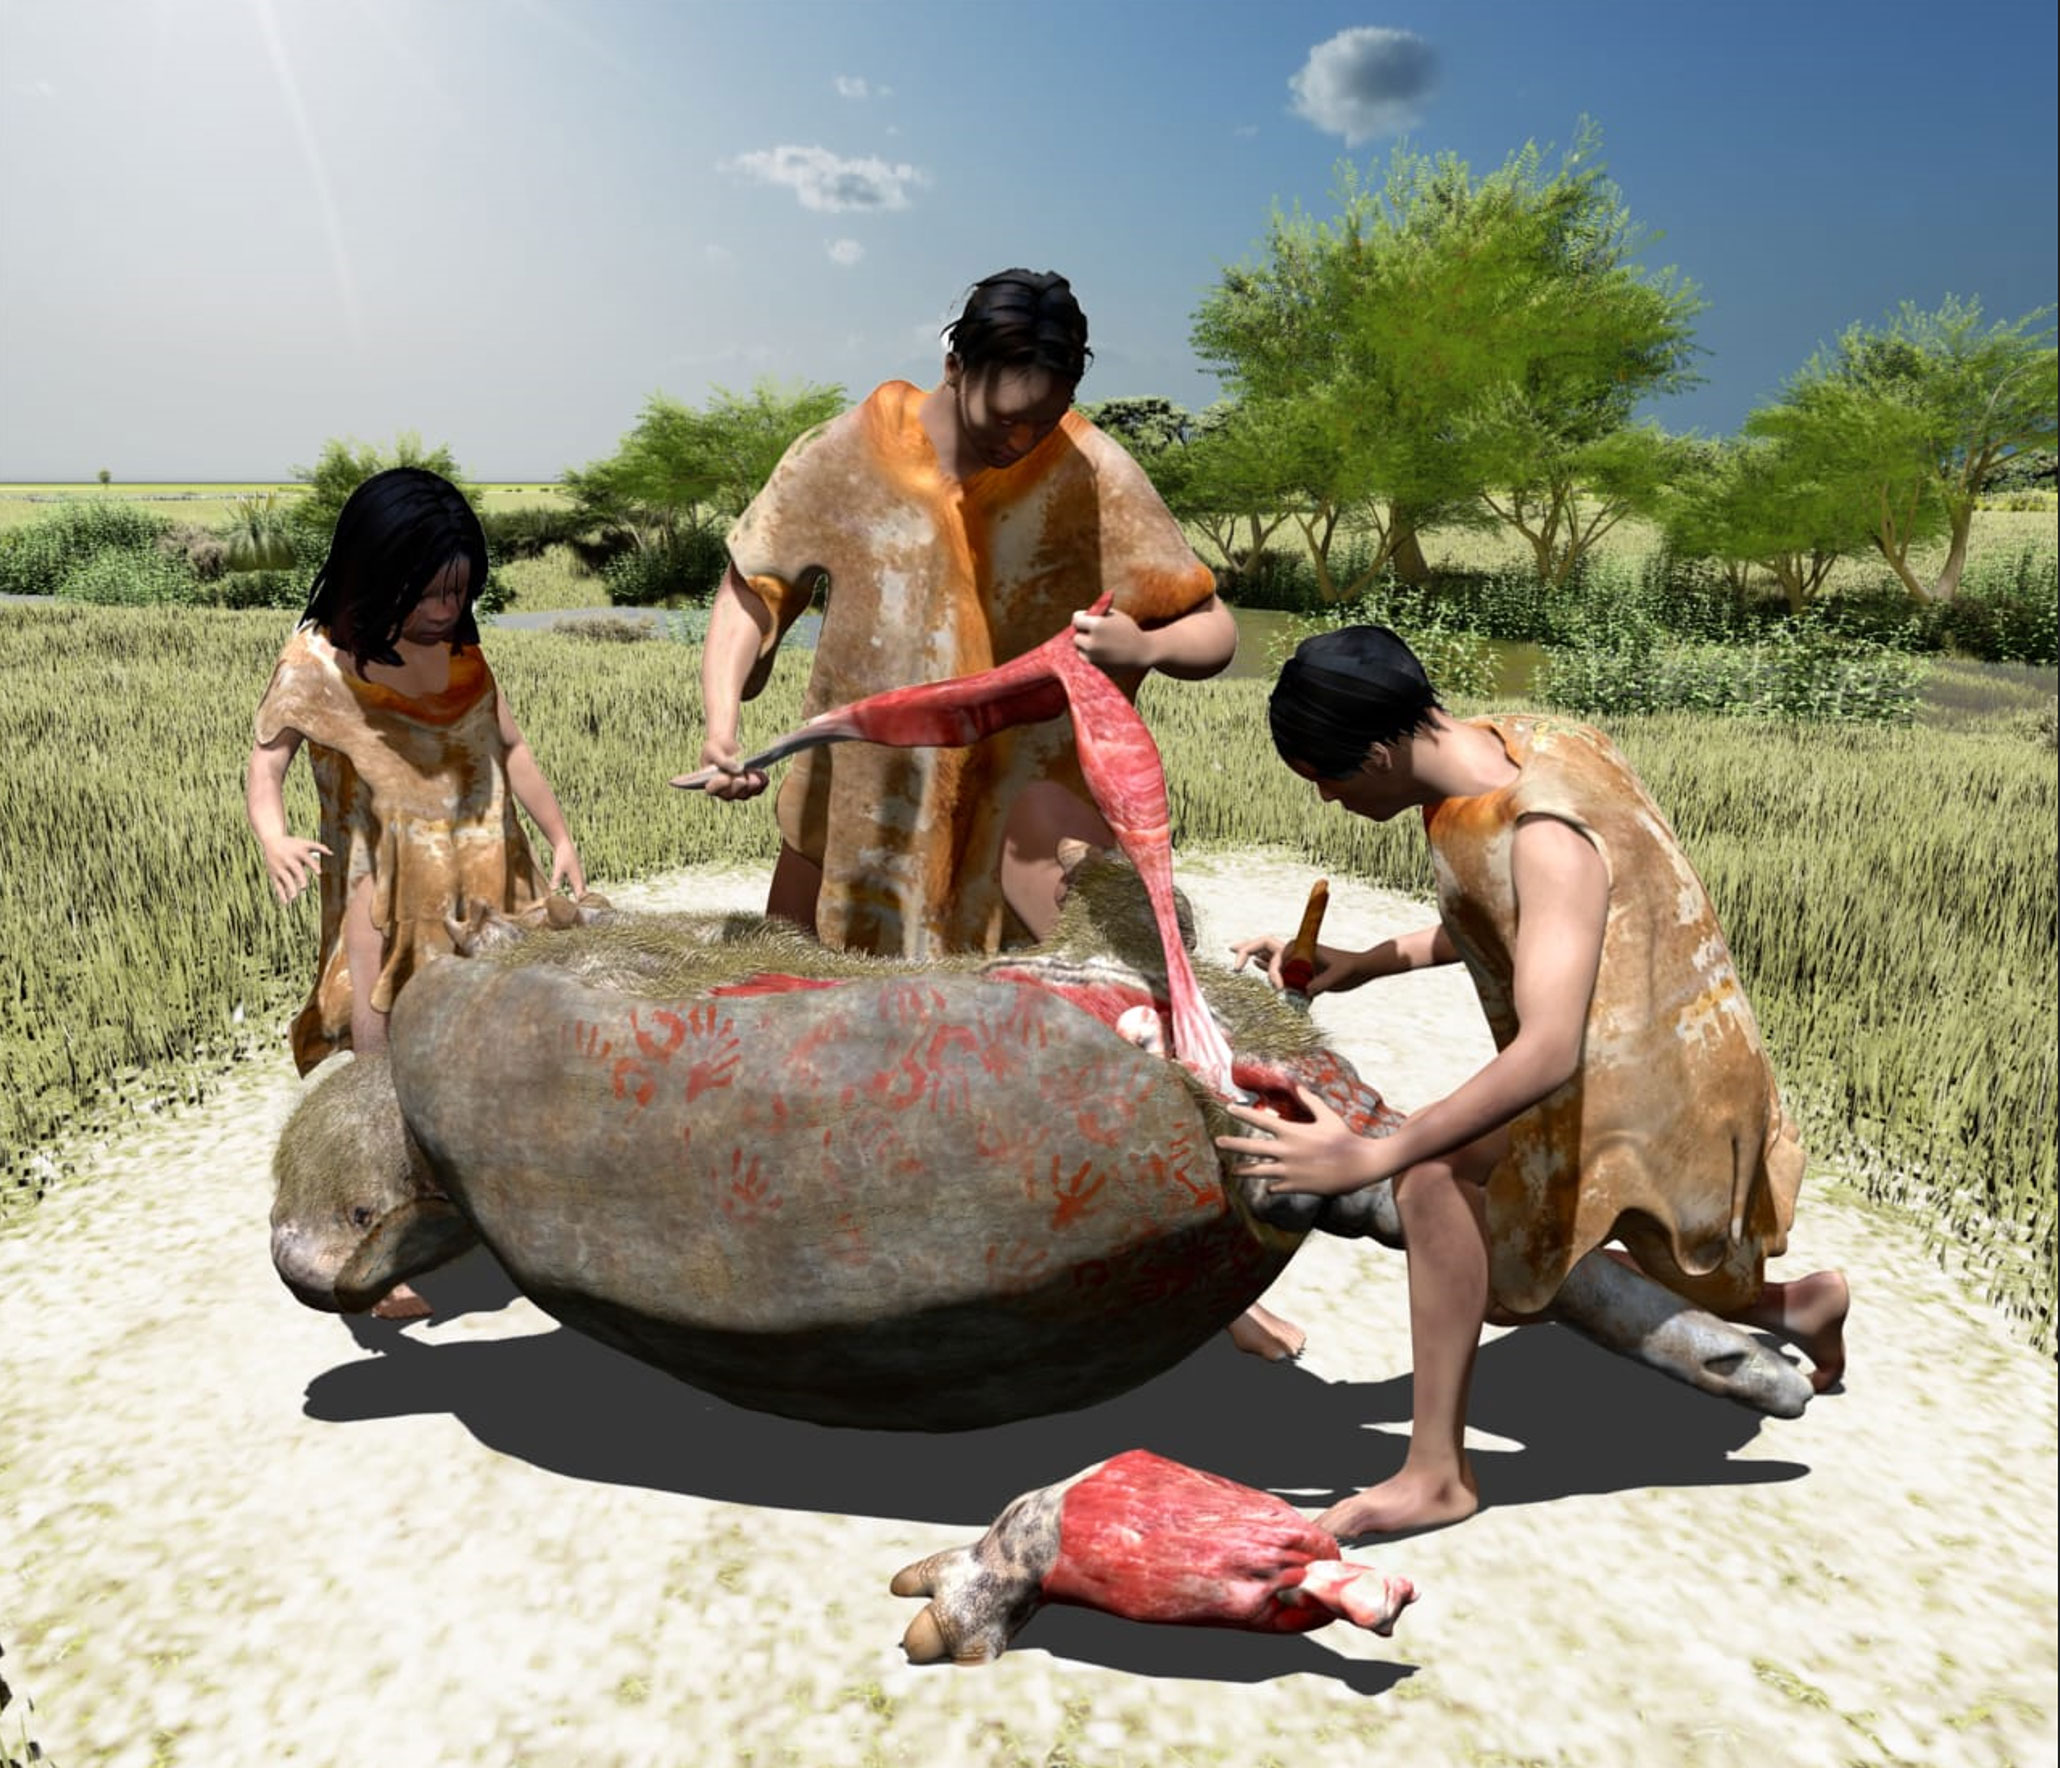 3-D rendering of the probable butchery event